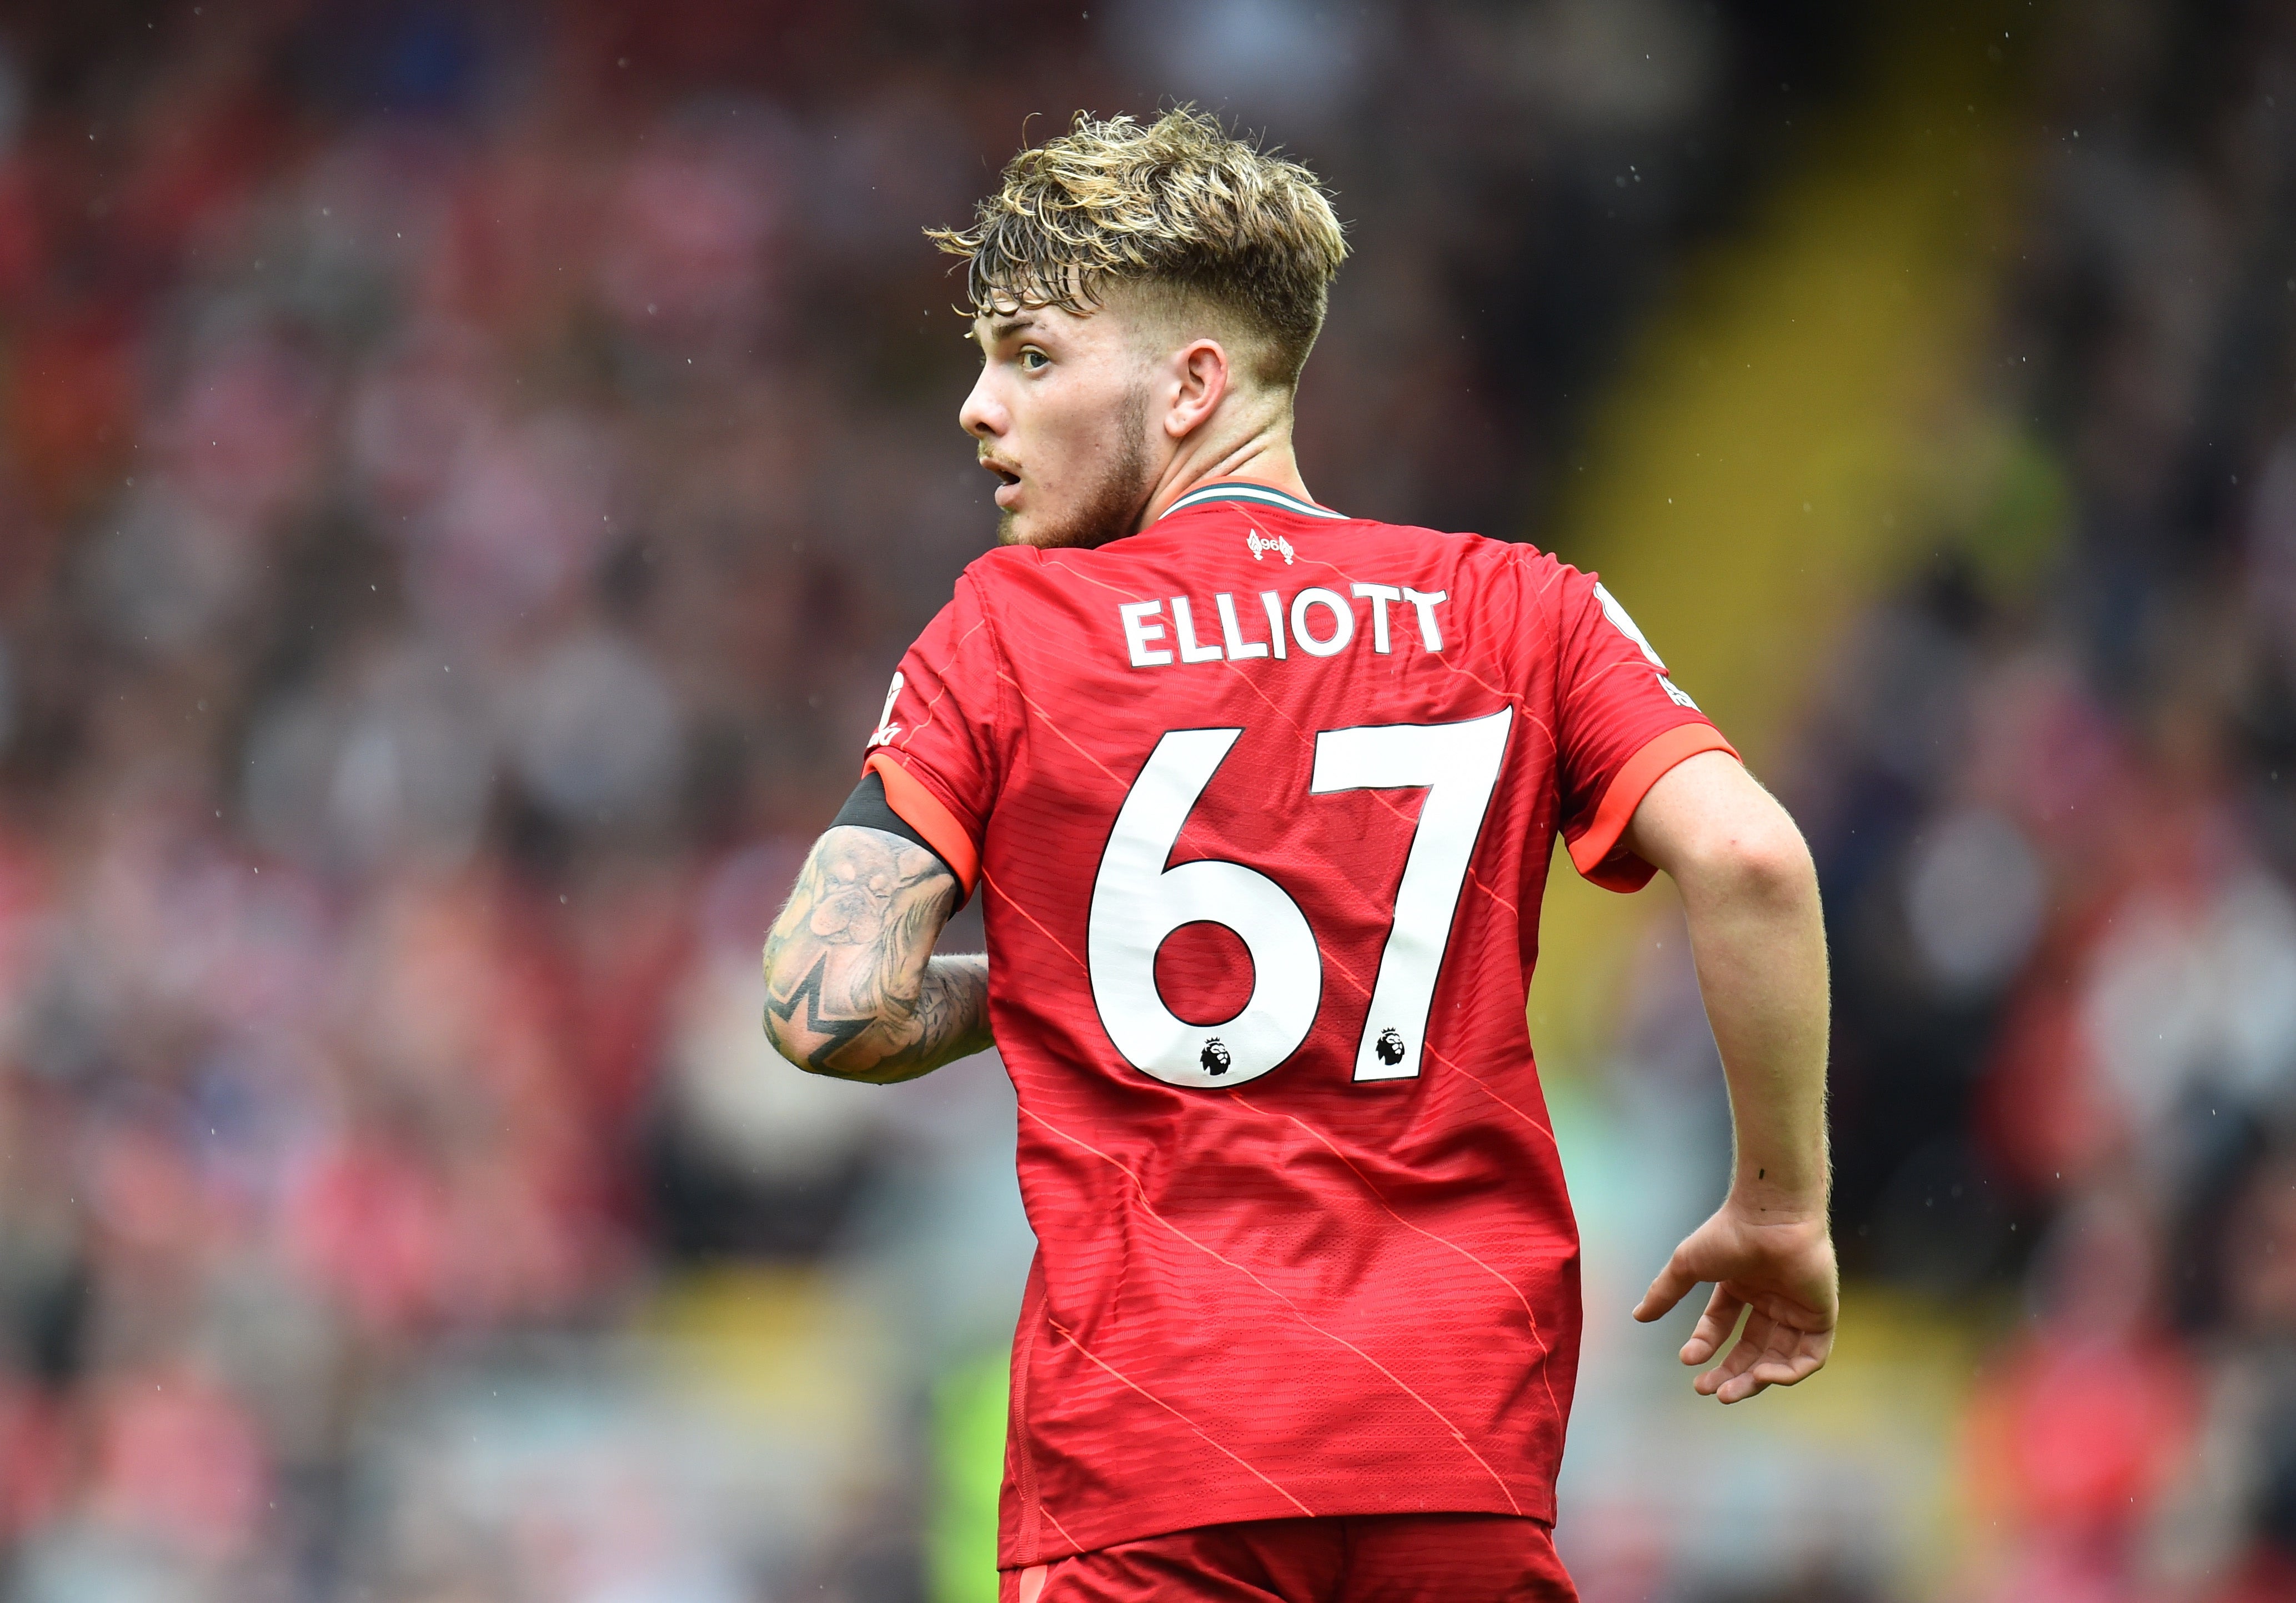 Burnley identified Elliott as a weak link and in return he topped the progressive passes, progressive carries and pressures against them